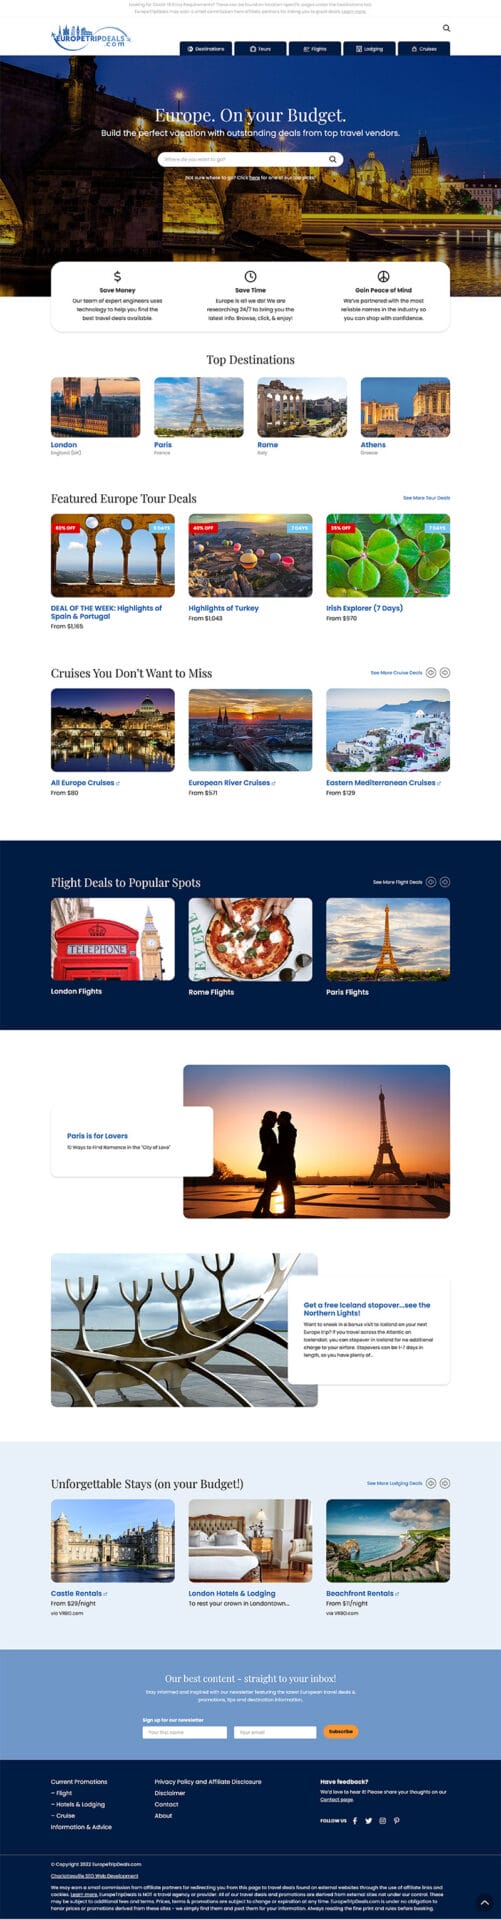 Home page website design for Europe Trip Deals